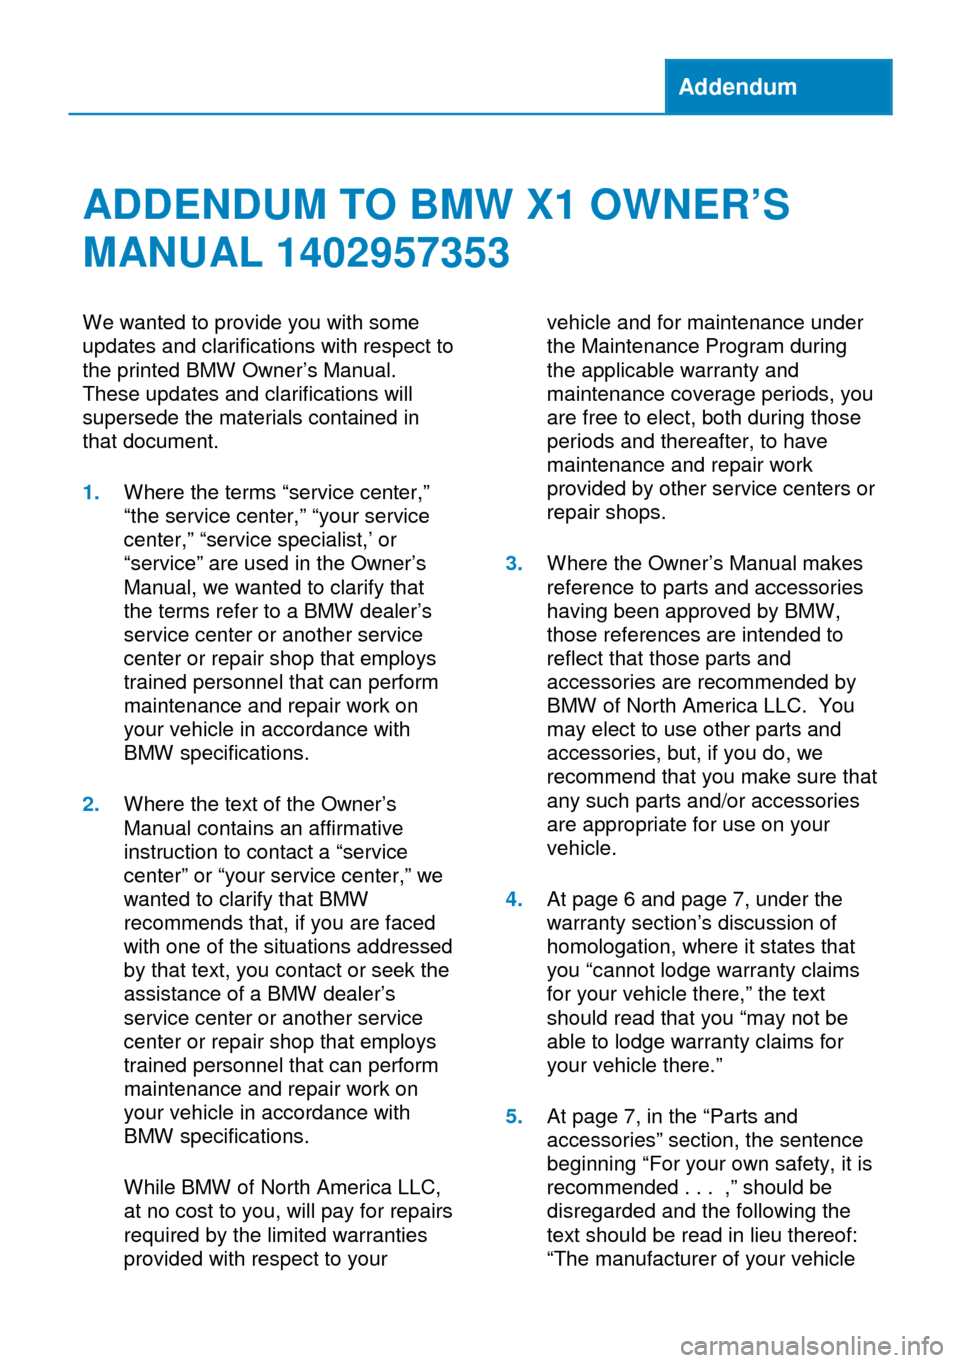 BMW X1 2014 E84 Owners Manual Addendum
ADDENDUM TO BMW X1 OWNER’S
MANUAL 1402957353
We wanted to provide you with some
updates and clarifications with respect to
the printed BMW Owner’s Manual.
These updates and clarifications